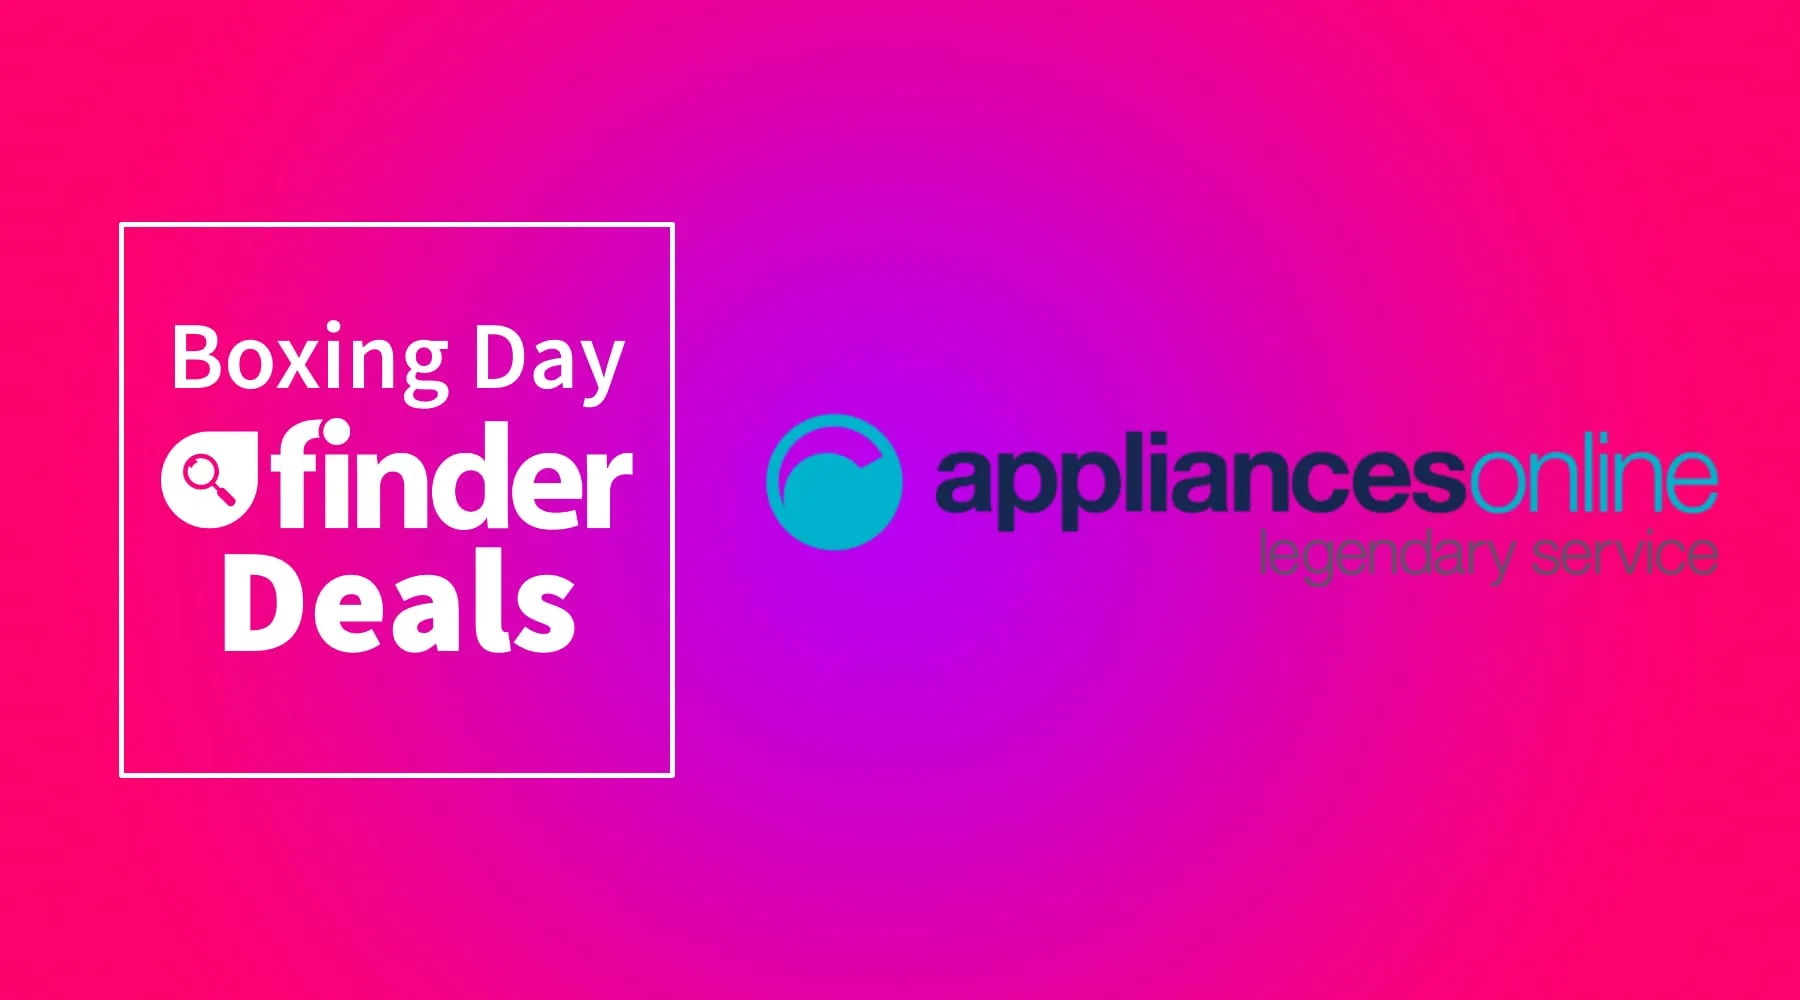 Best Appliances Online Boxing Day 2020 deals: Up to $1,415 off